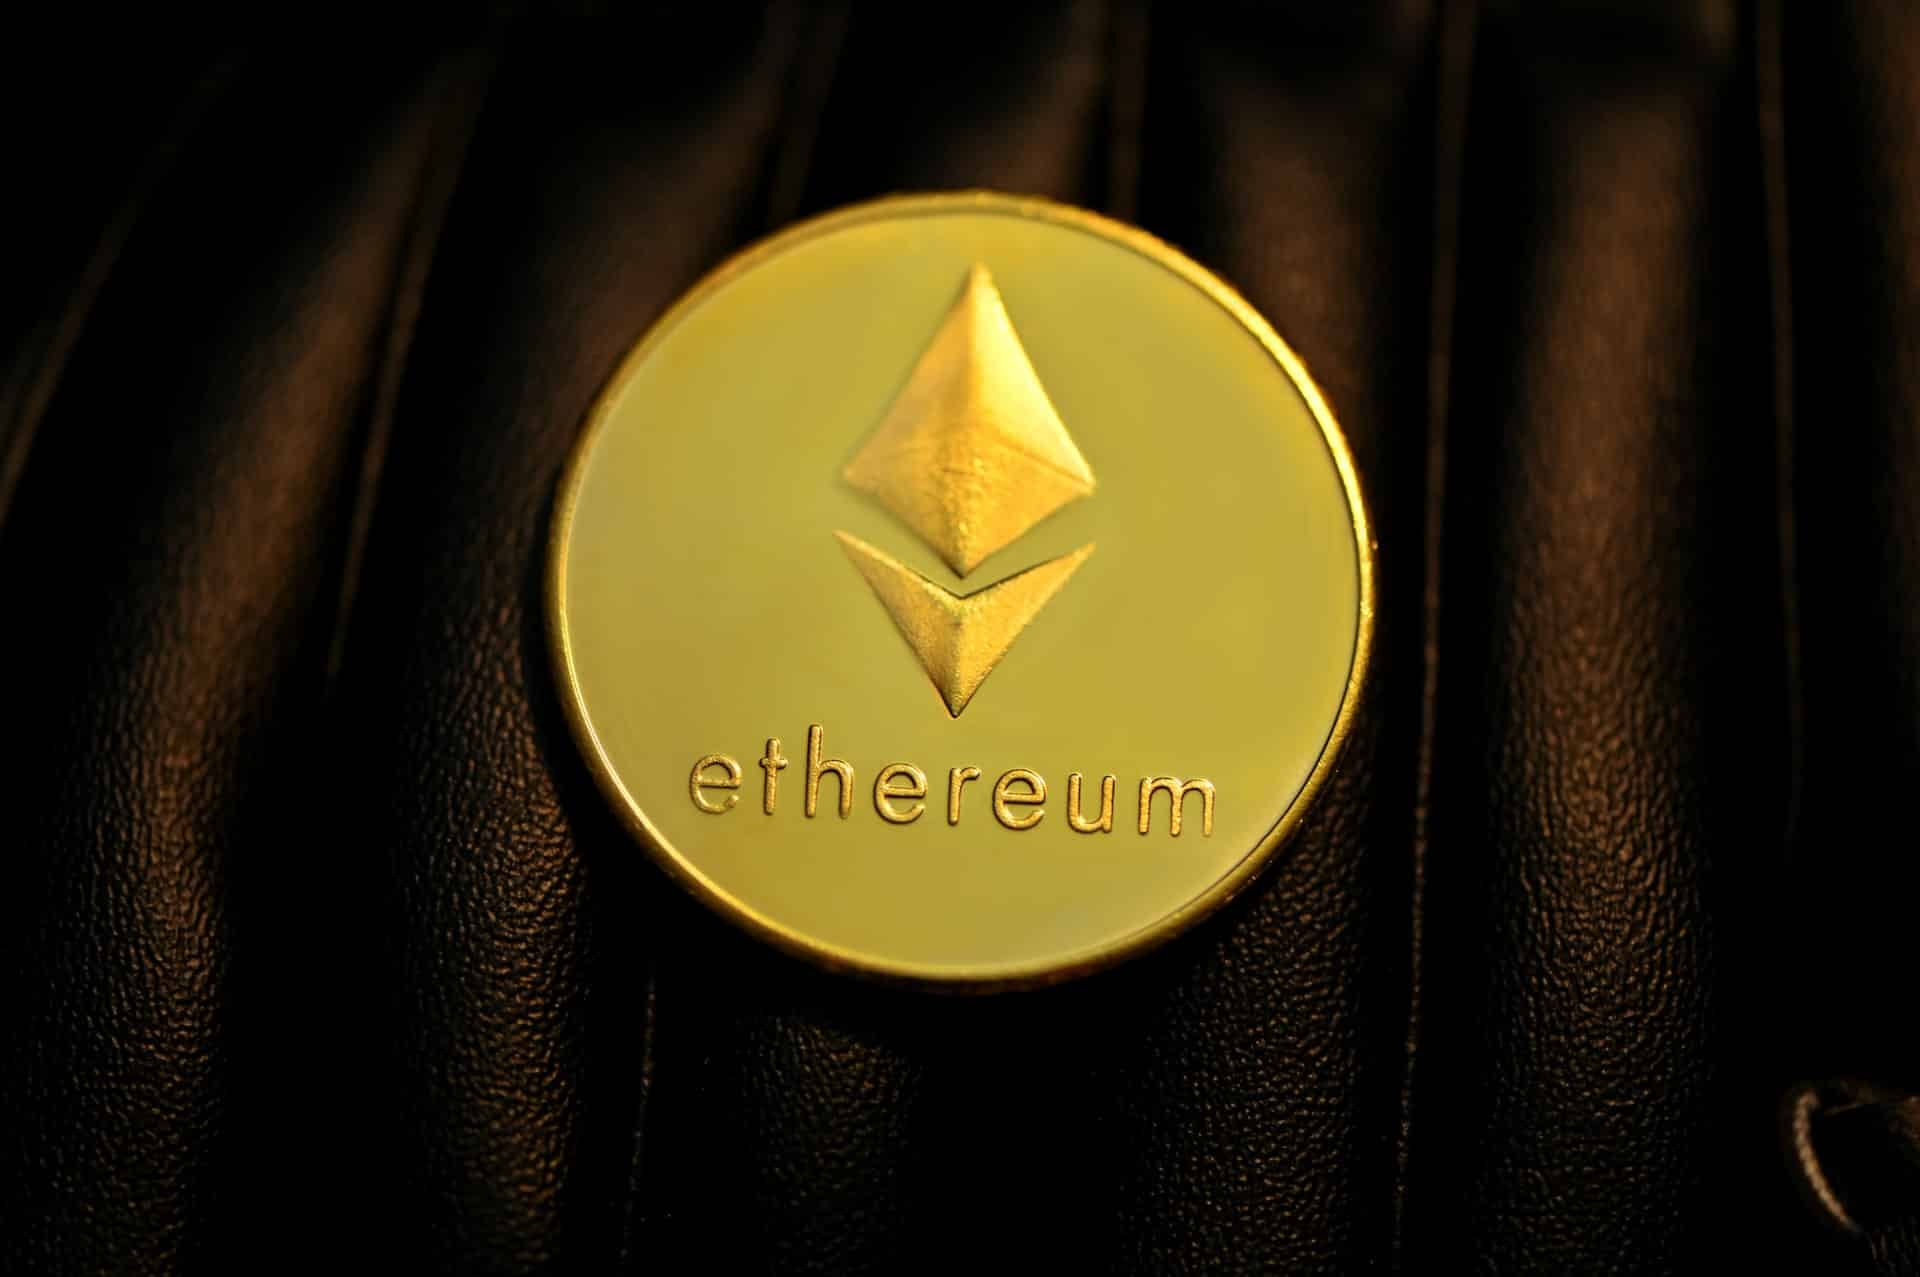 Ethereum (ETH) Price Prediction 2025-2030: What are the probabilities of ETH’s 500% hike?